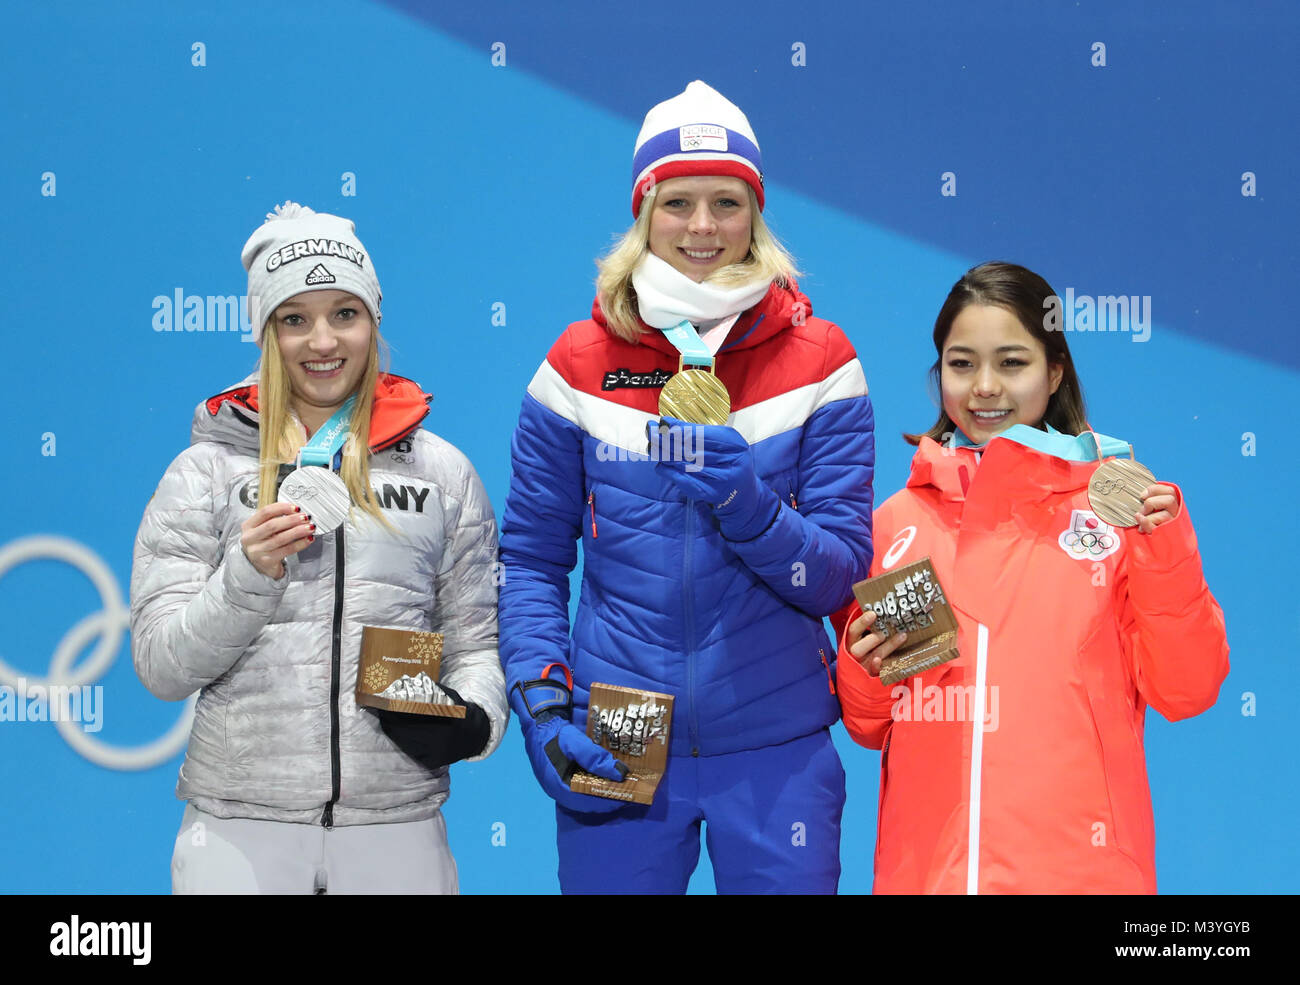 Altid raid Styring Pyeongchang, South Korea. 13th Feb, 2018. Champion Maren Lundby (C) from  Norway, second-placed Katharina Althaus (L) from Germany and third-placed  Sara Takanashi from Japan pose for photos during the medal ceremony of